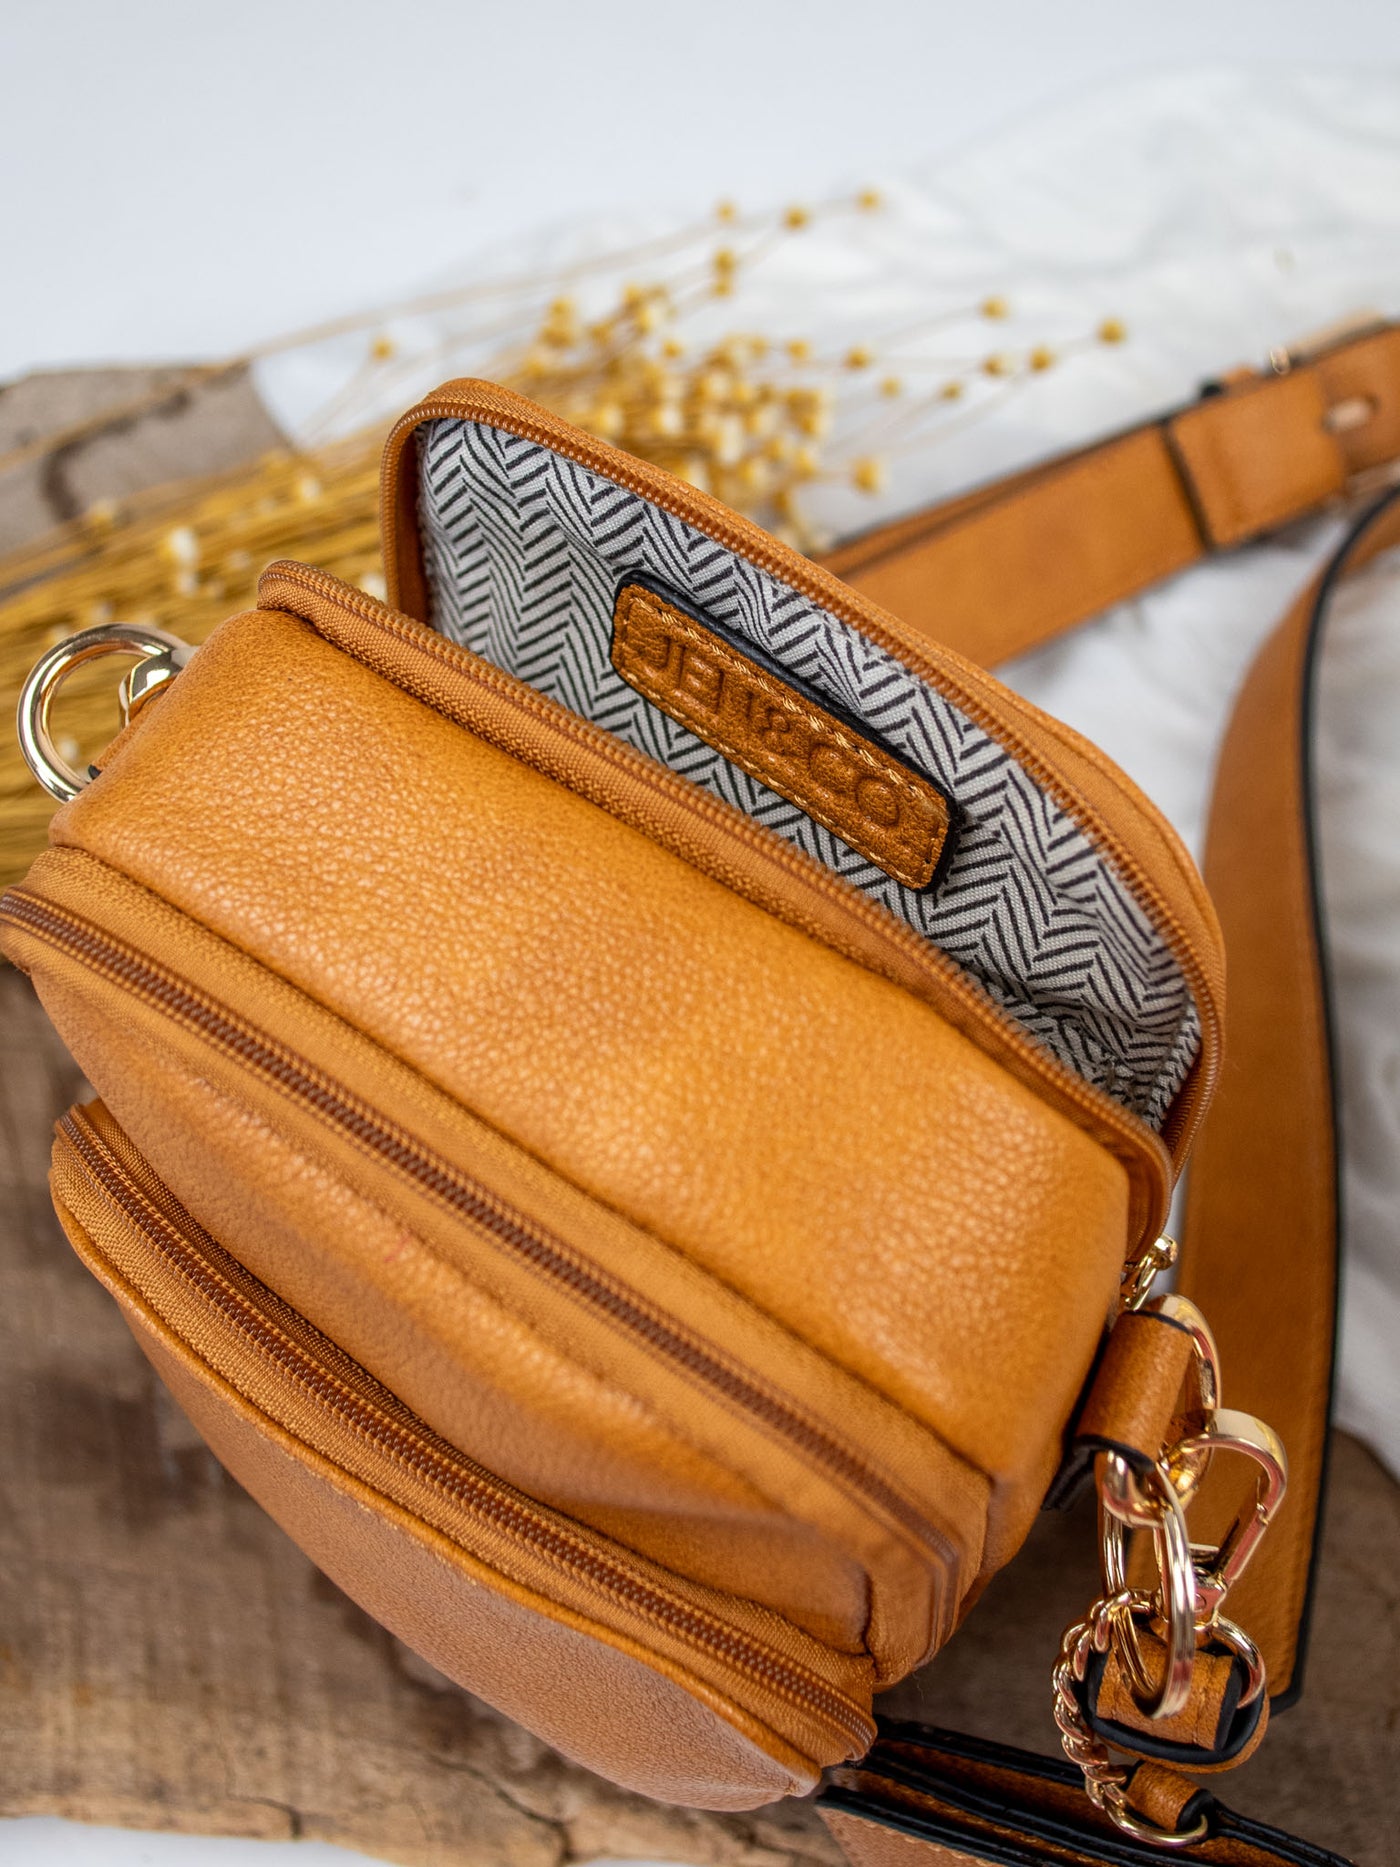 A pumpkin brown vegan leather crossbody bag with a detachable snap pouch.